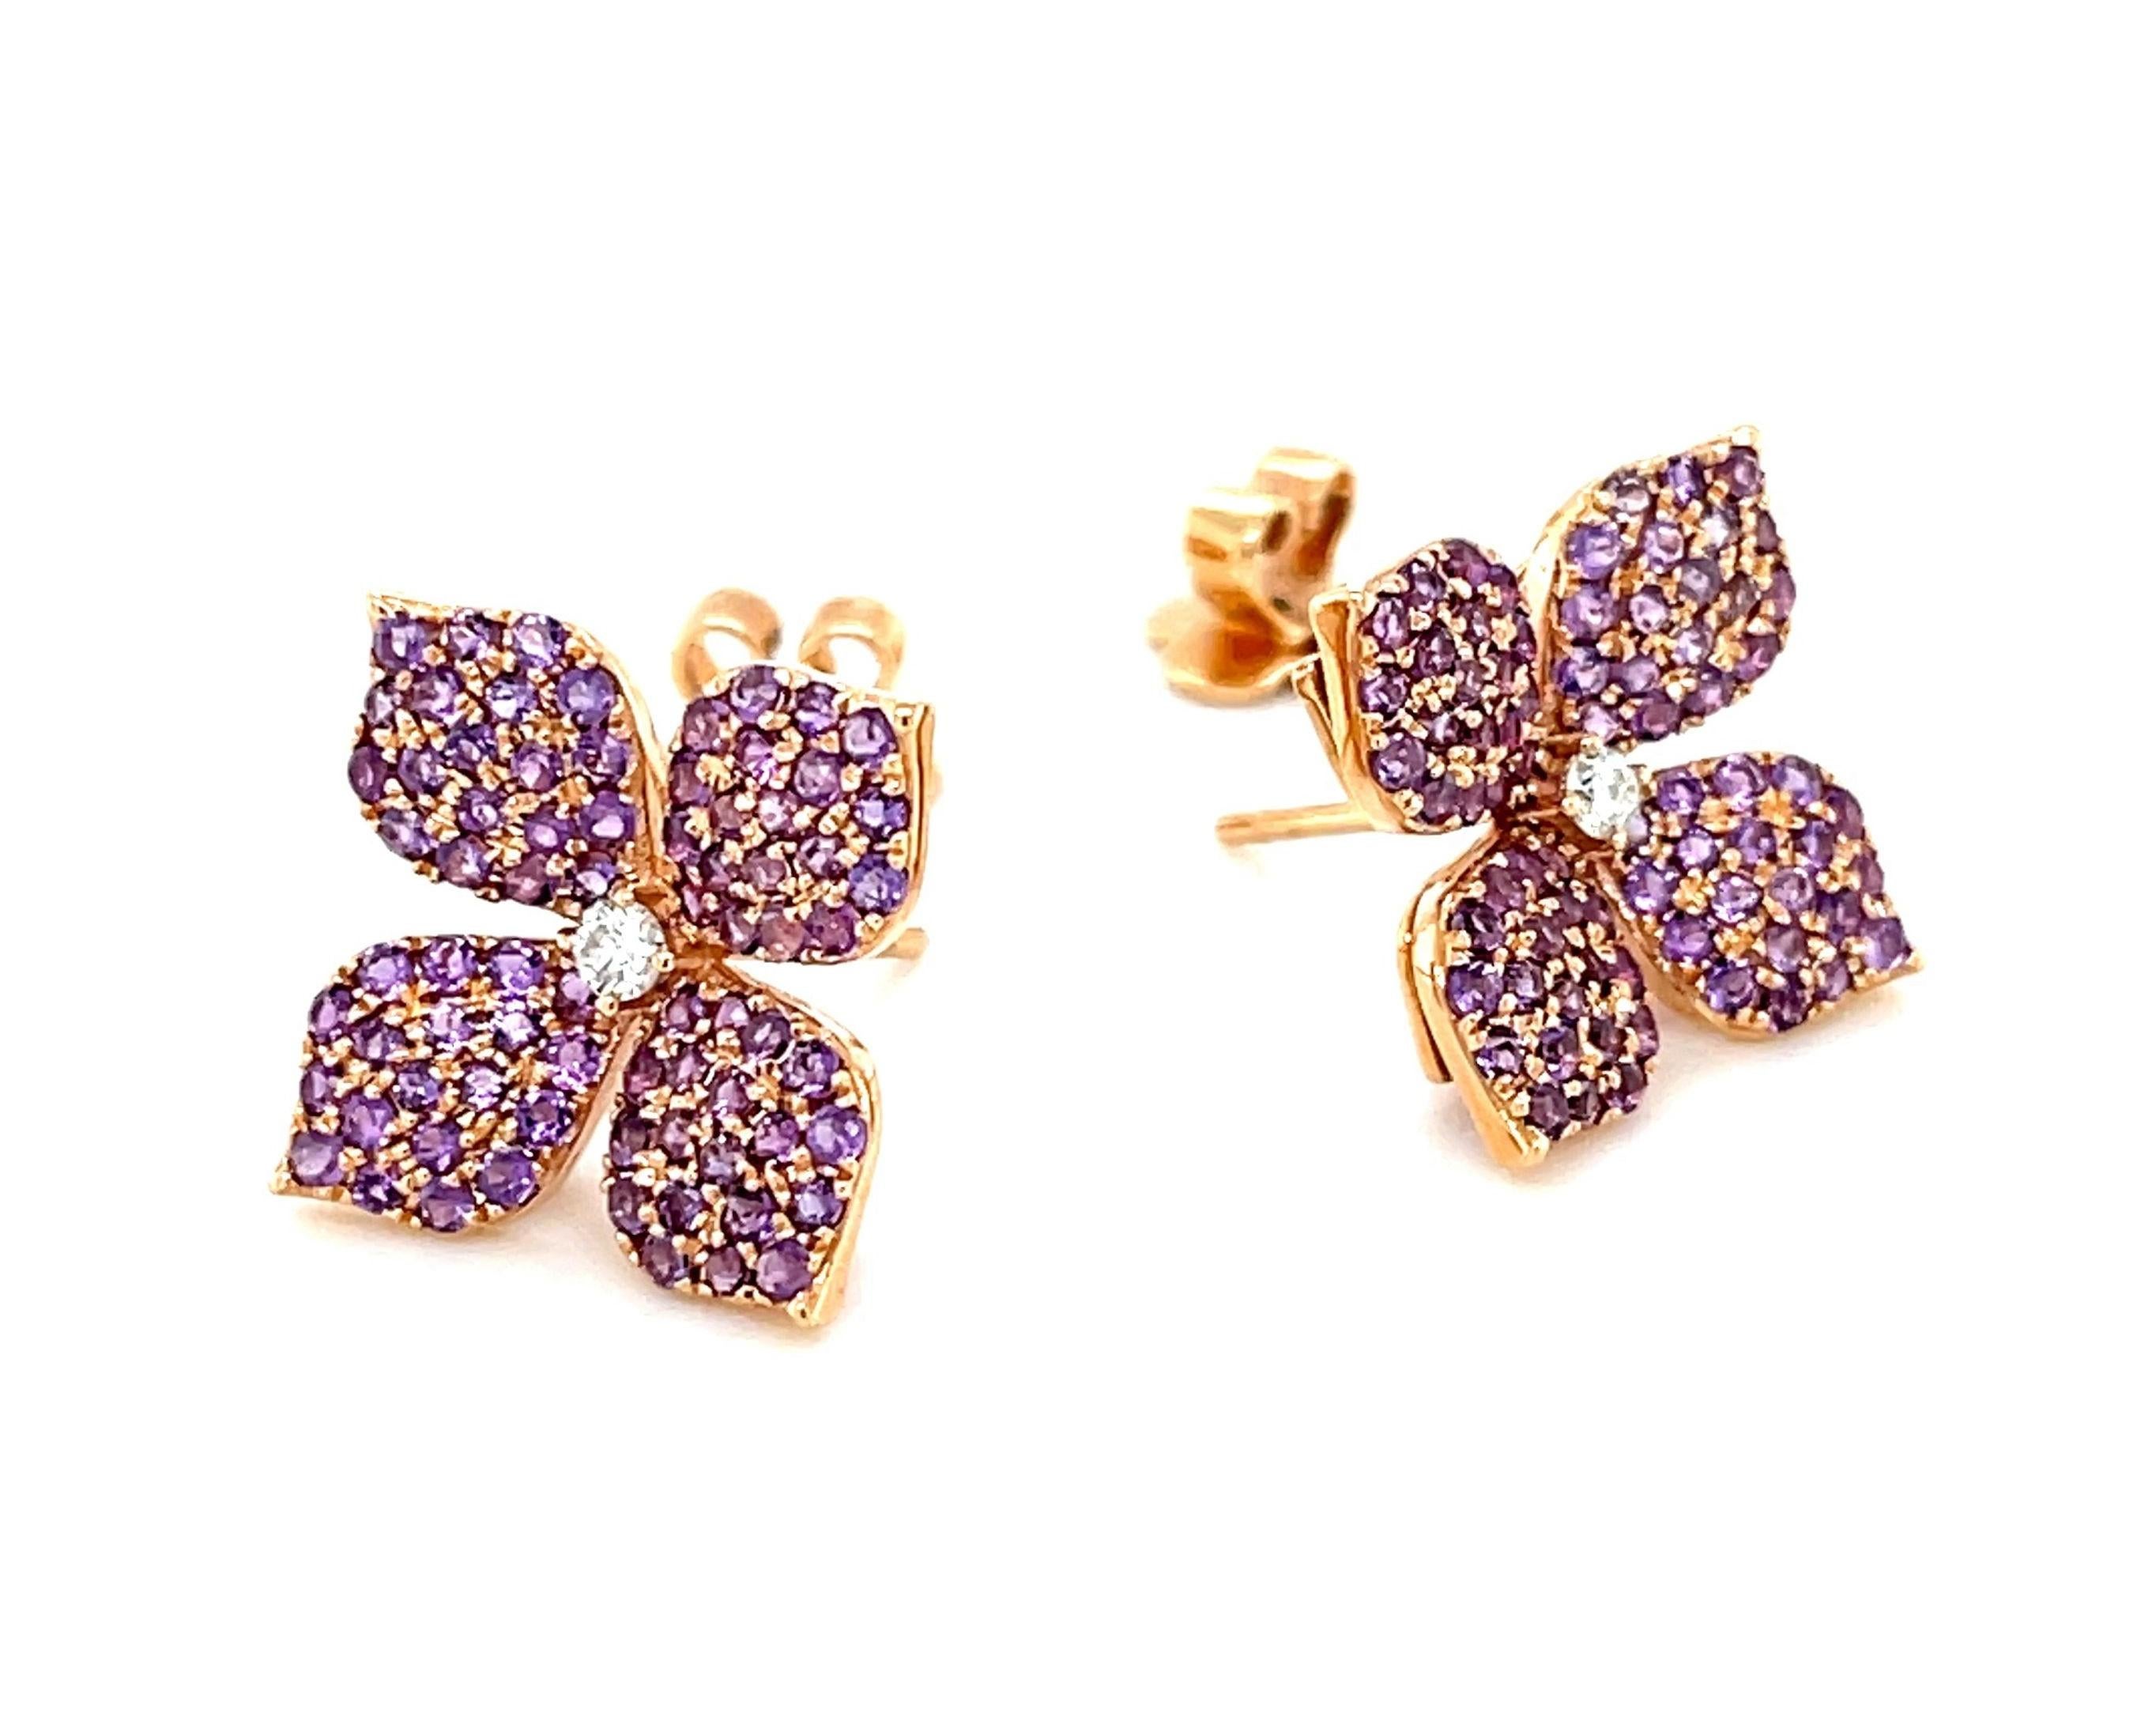 Sparkling purple amethyst petals surround brilliant white diamonds in these gorgeous floral earrings crafted of 18k rose gold. The beautifully curved petals are 